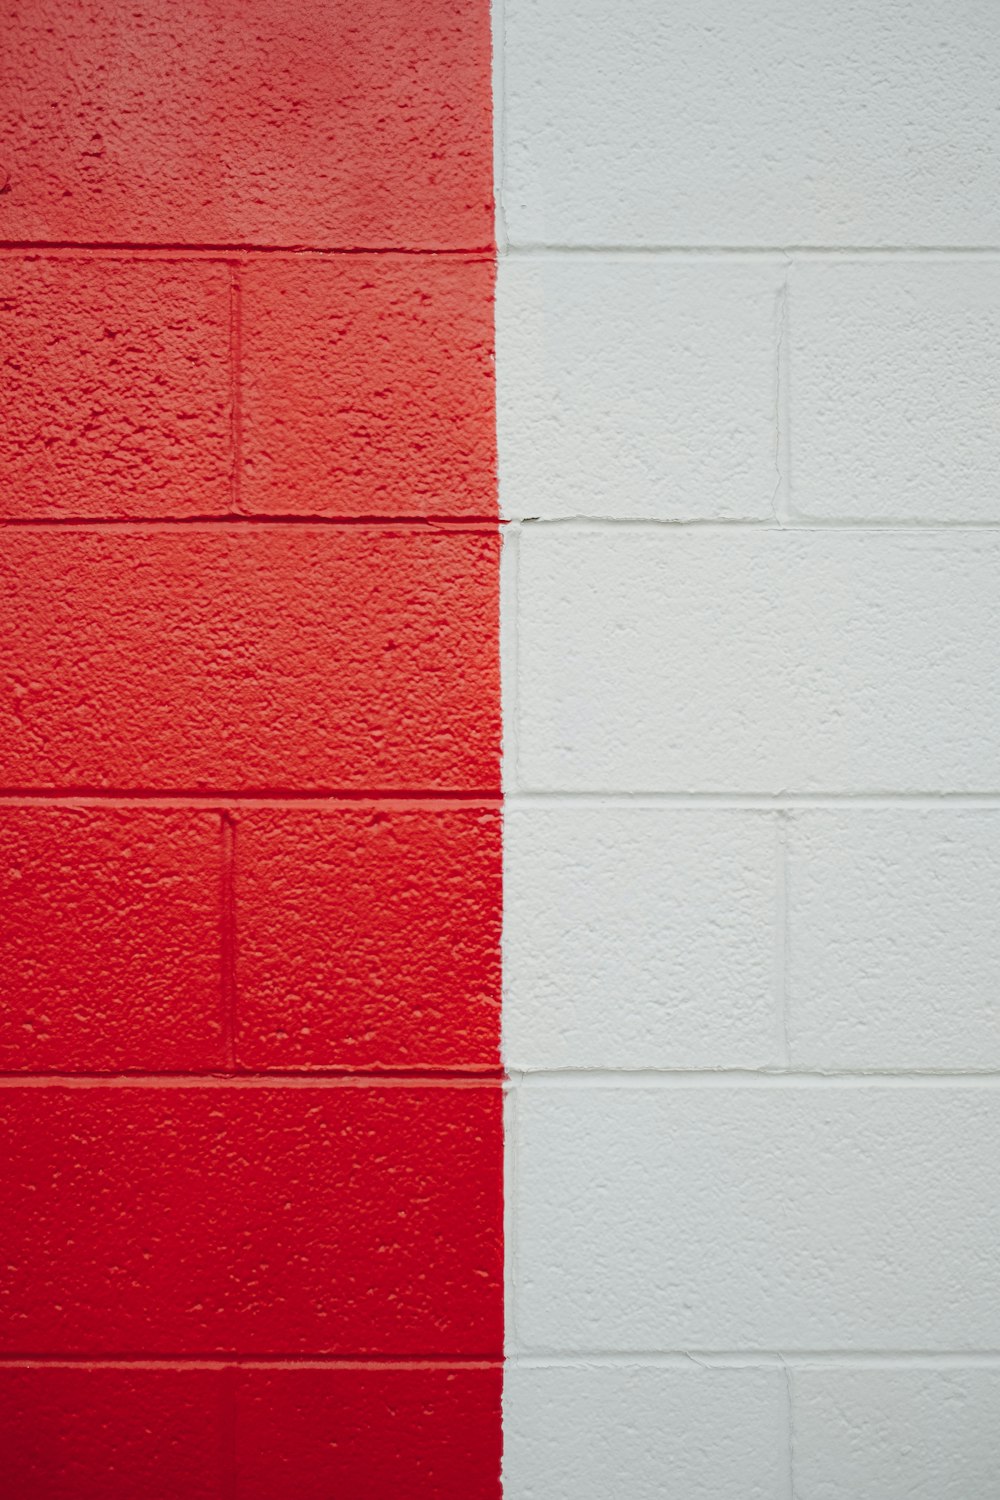 cool red and white backgrounds